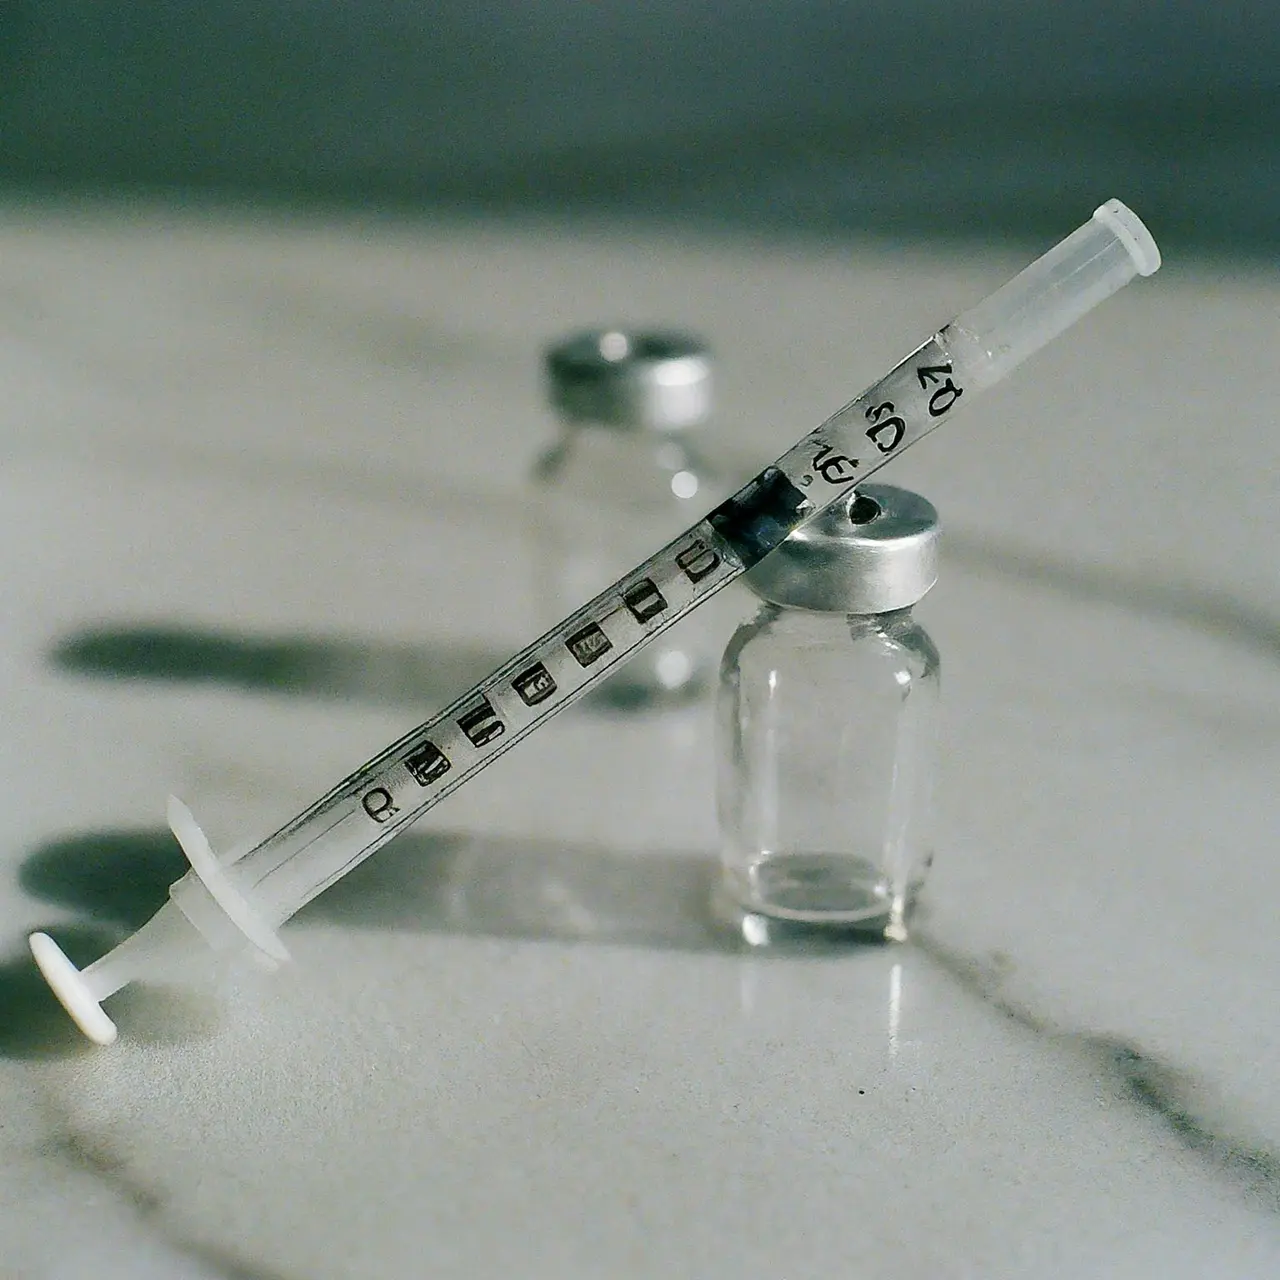 A syringe and small vials on a marble surface. 35mm stock photo